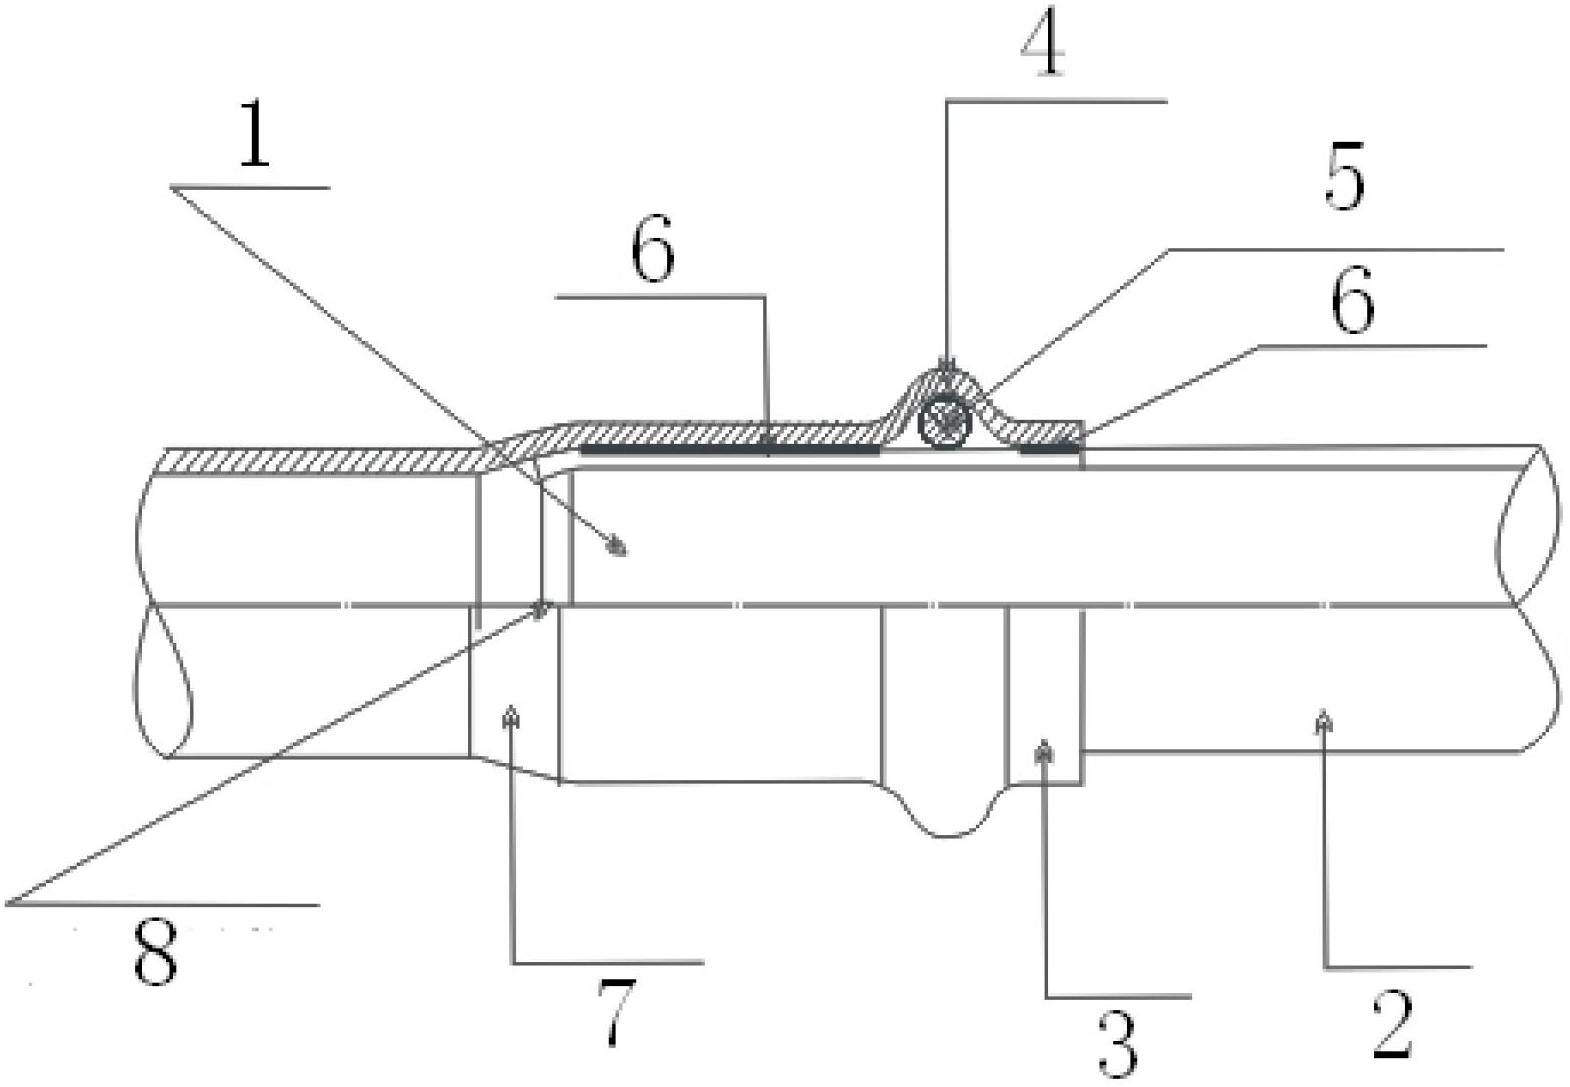 Process method for connecting metal-extrusion type pipe fitting with high infiltration prevention